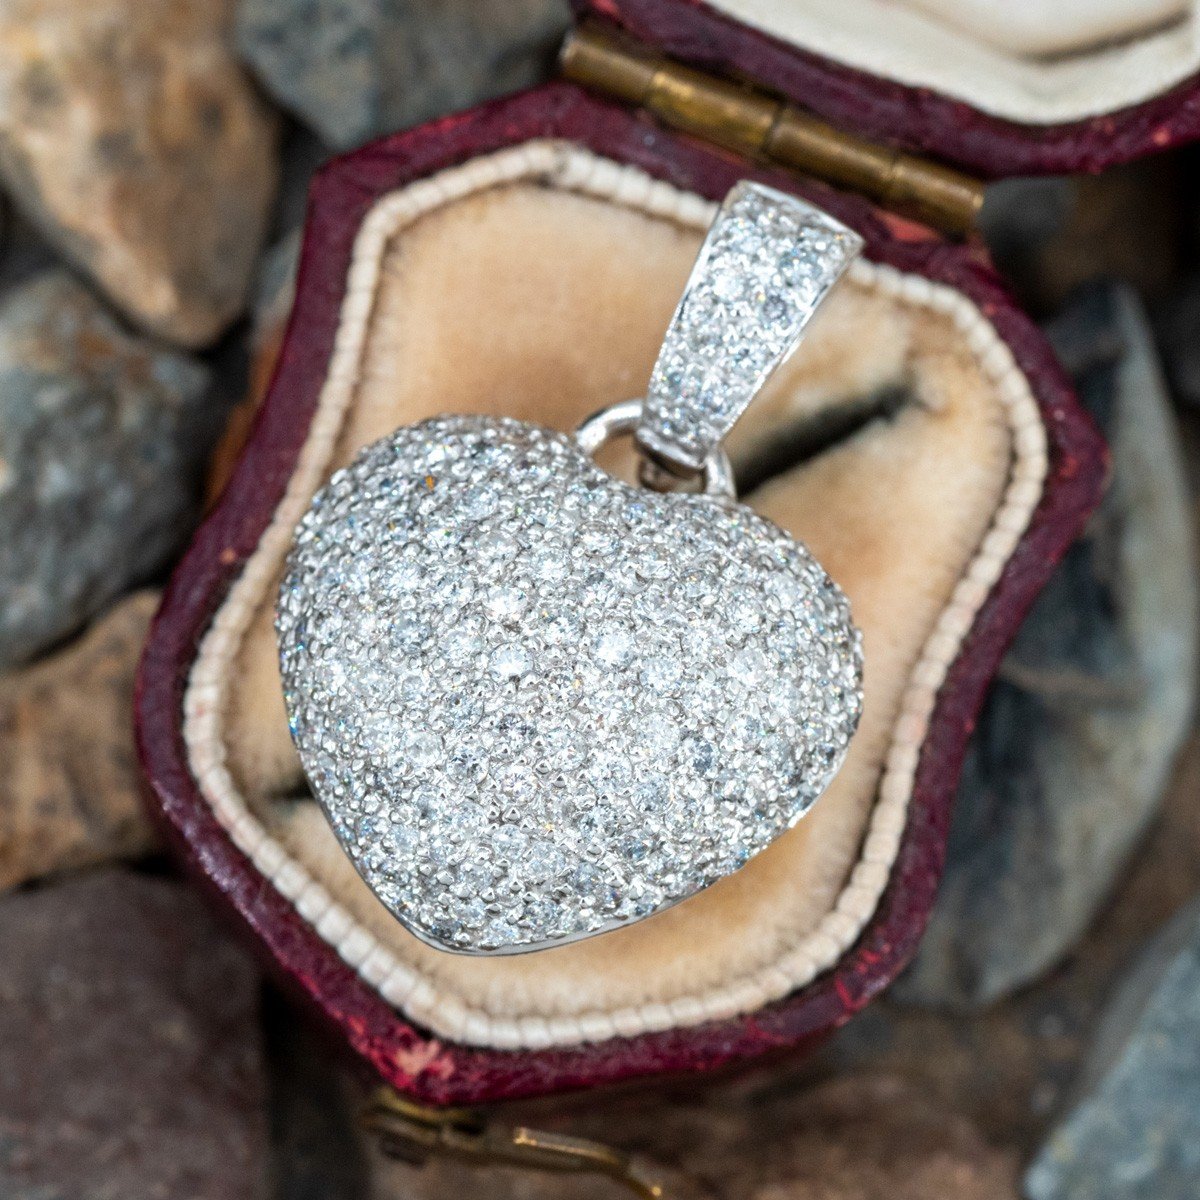 Pave Diamond Heart Pendant Necklace in 14k White Gold